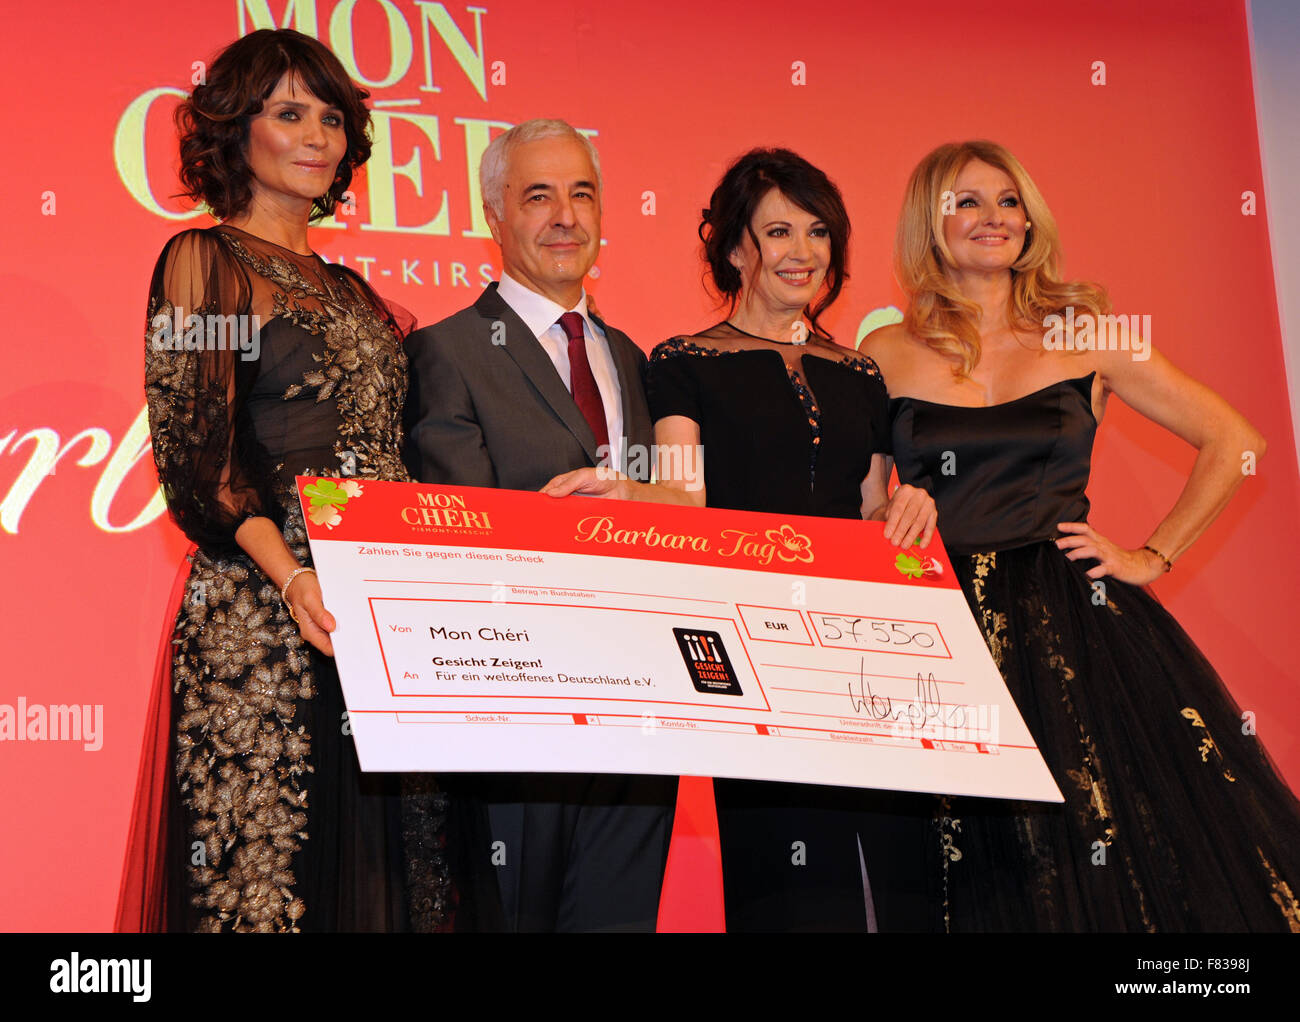 The host of the evening and CEO of chocolate manufacturer Ferrero, Carlo Vassallo (2nd L), actress Iris Berben (2nd R), presenter Frauke Ludowig (R) and model Helena Christensen (l) present the charity donation during the Barbara Day celebrations hosted by chocolate manufacturer Mon Cheri in Munich, Germany, 4 December 2015. The charity event to place in aid of the organisation 'Gesicht zeigen! Fuer ein weltoffenes Deutschland e.V.', which is an association committed to raising awareness against discrimination and to strengthening social civility. Photo: Ursula Dueren/dpa Stock Photo